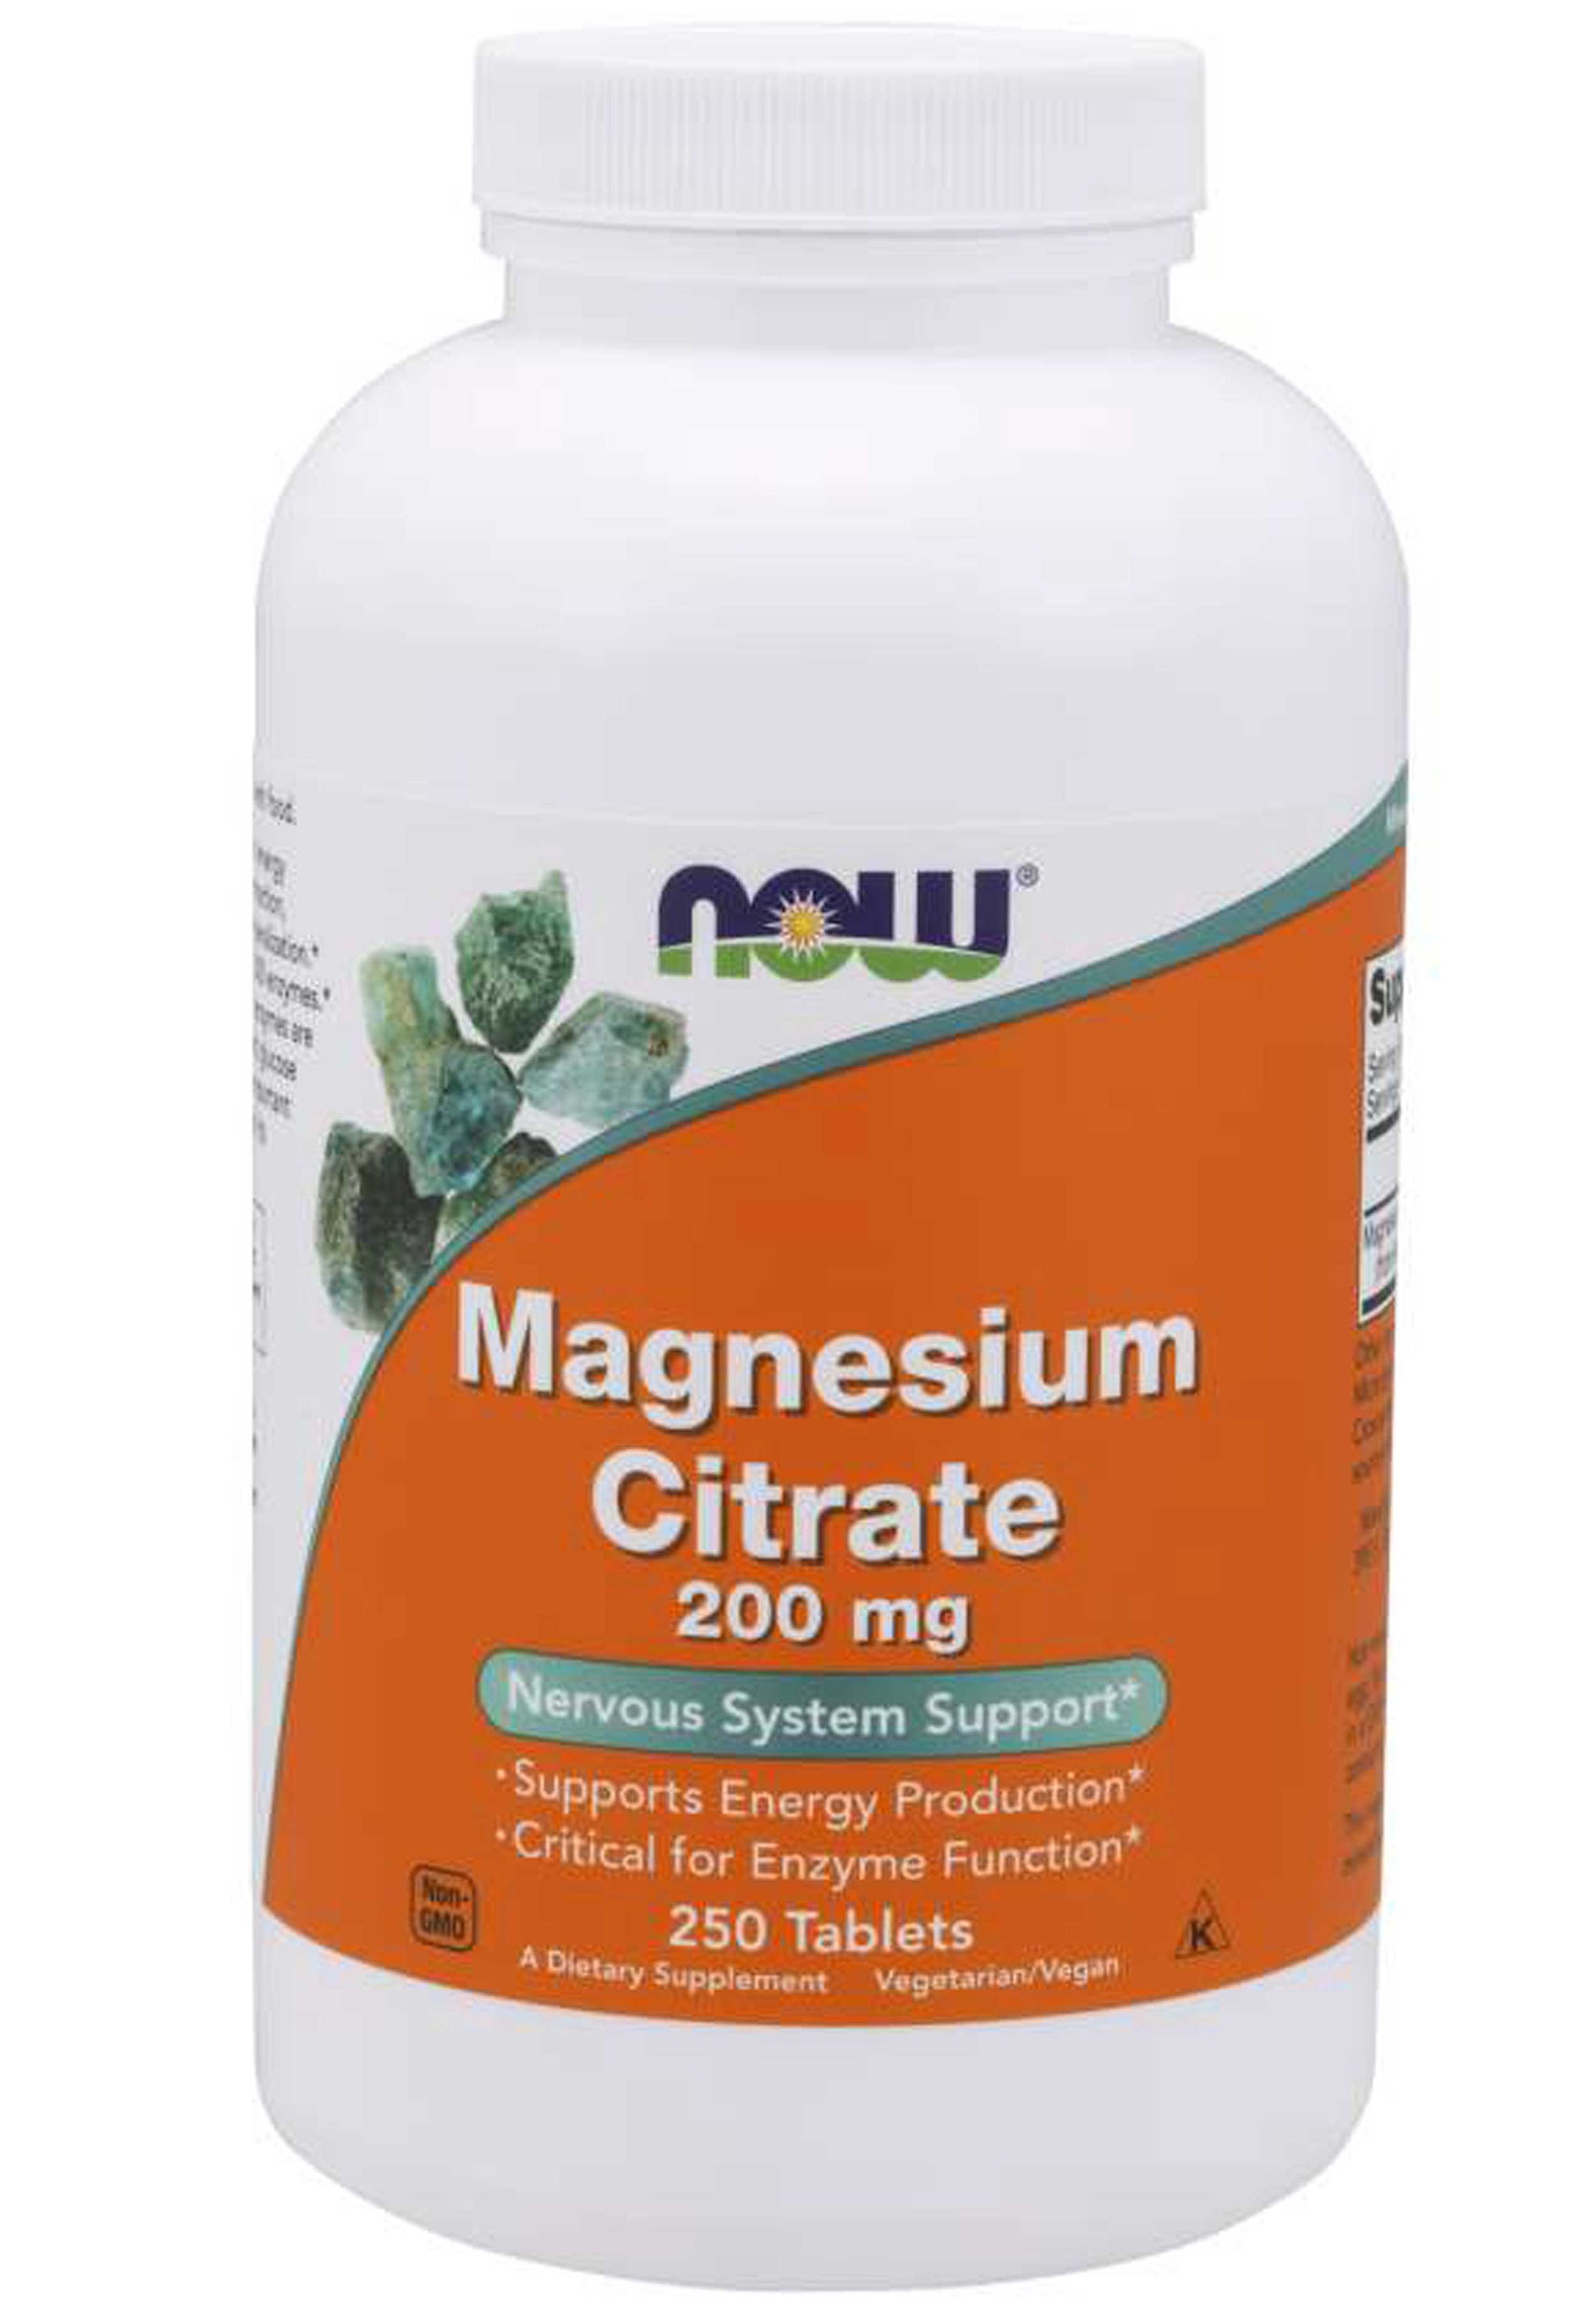 NOW Magnesium Citrate 200 mg Supplement First